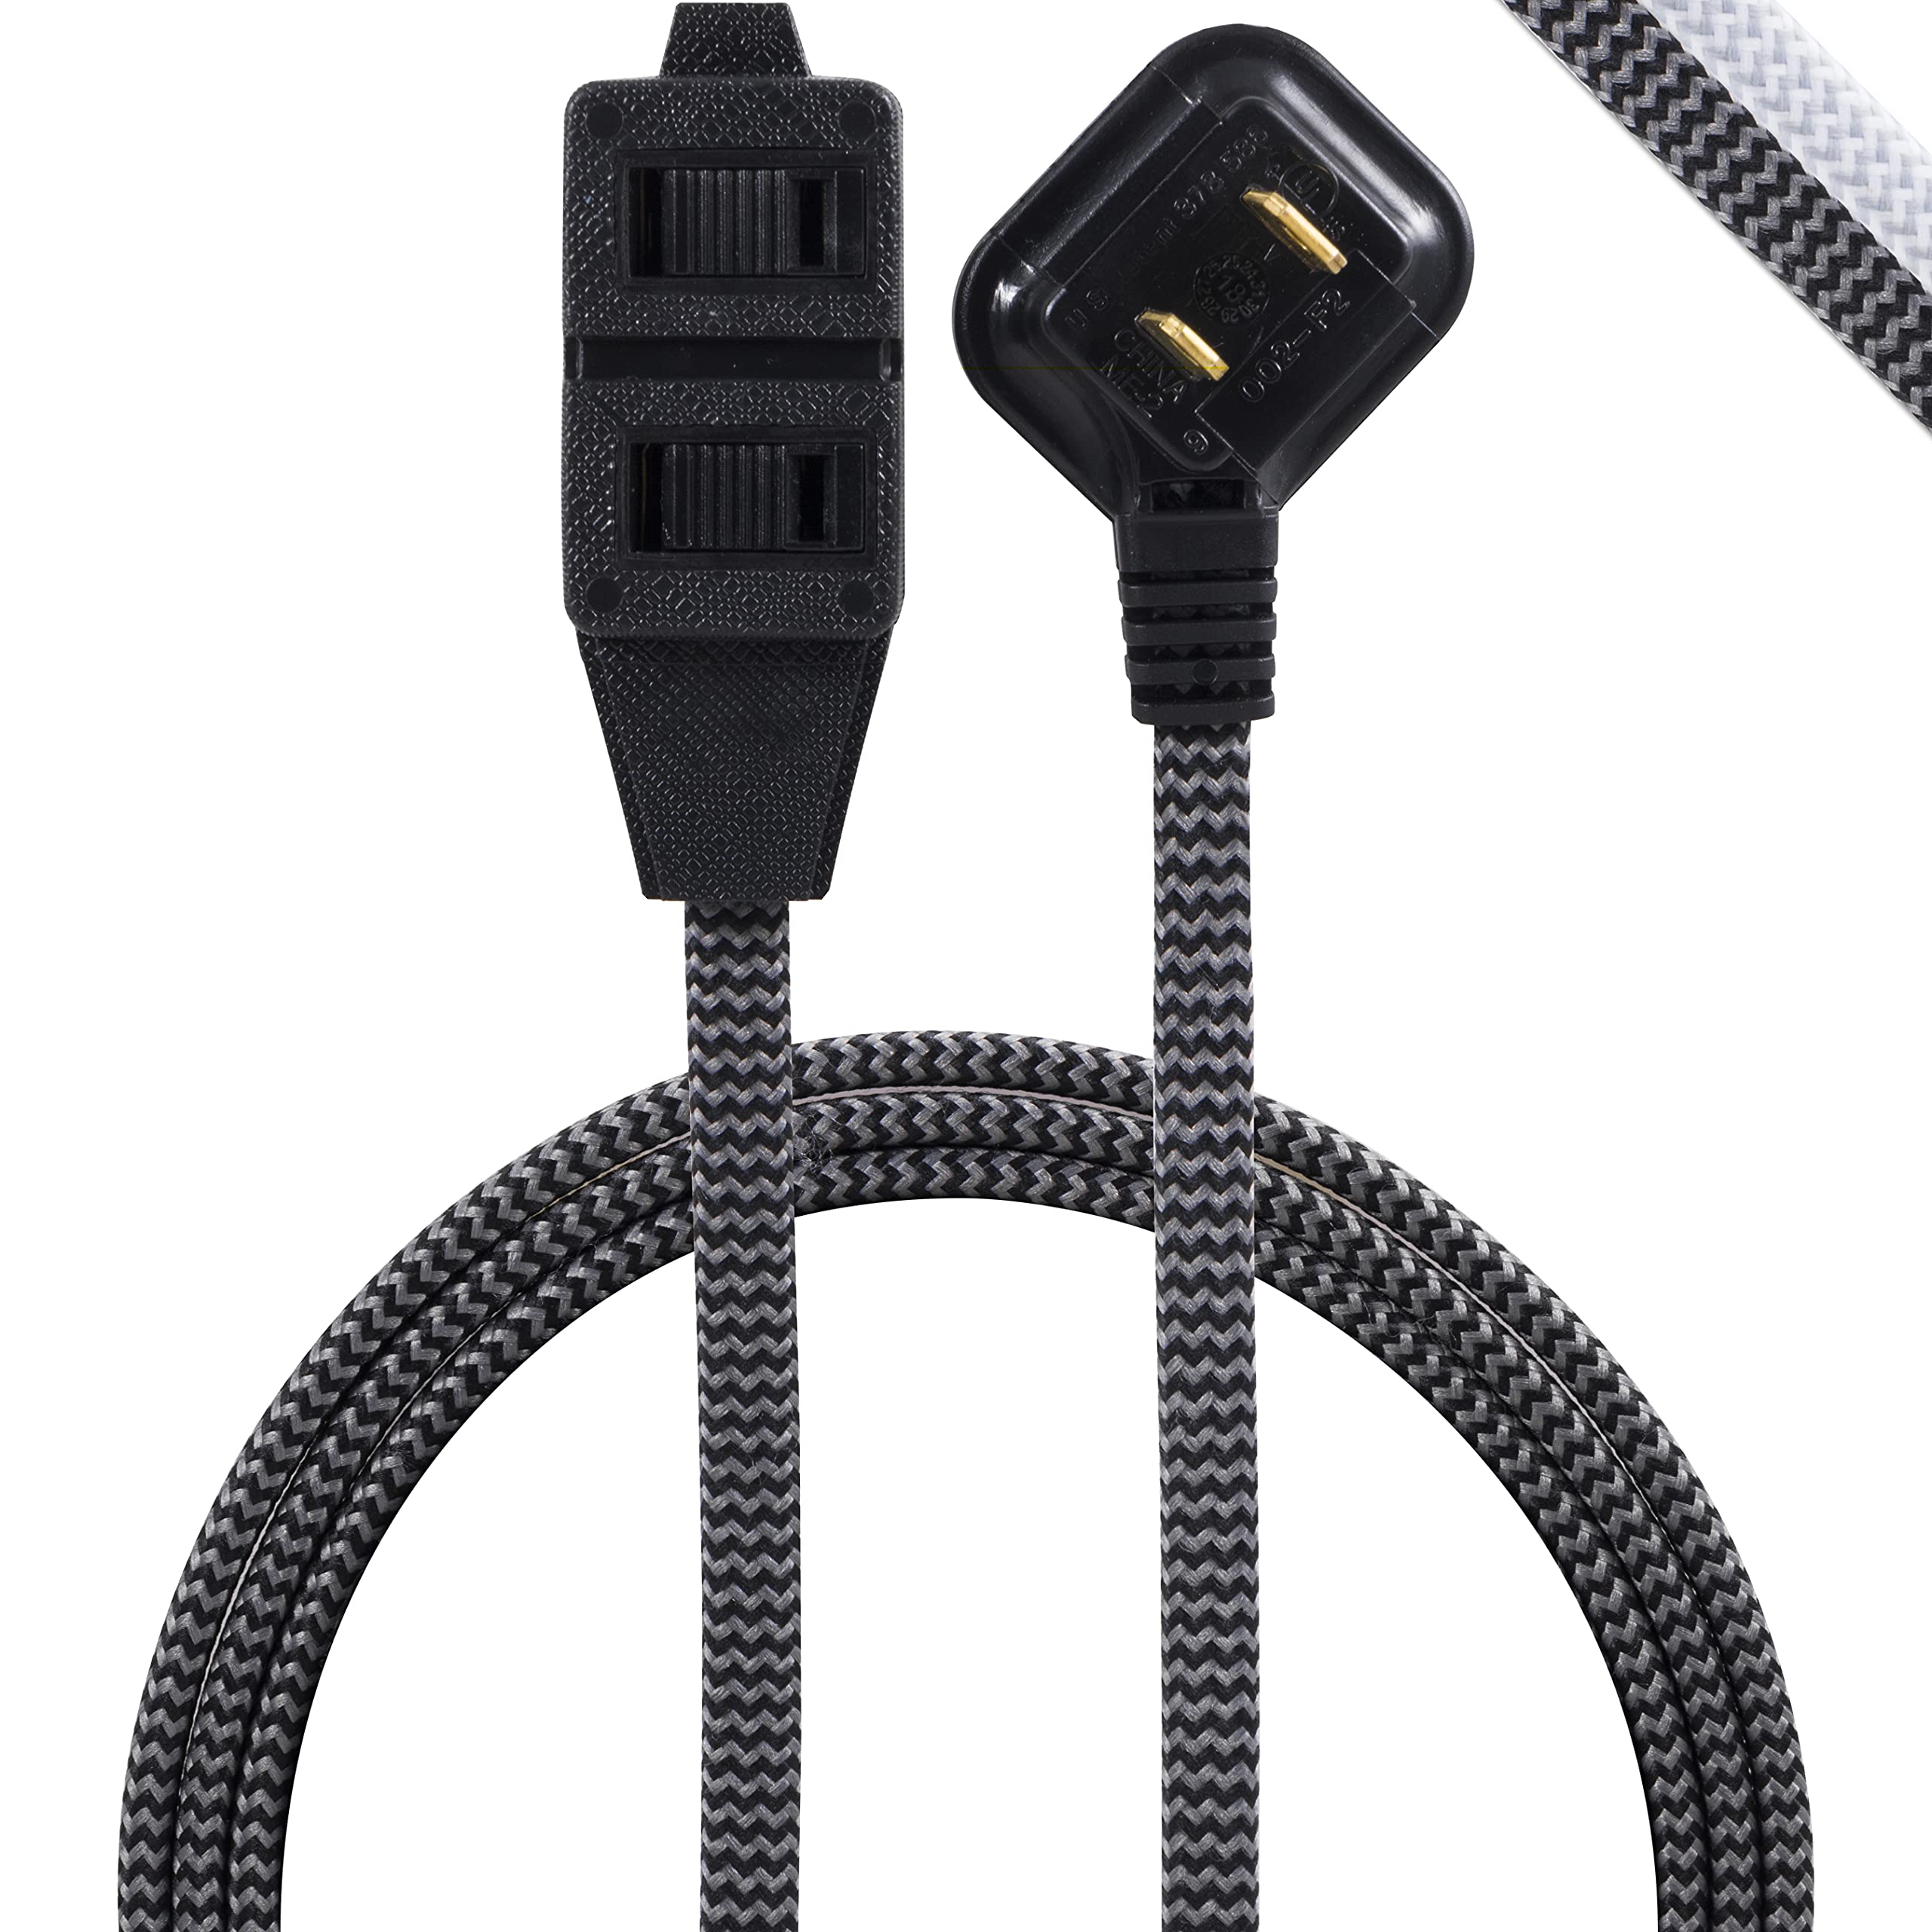 Book Cover GE Gray & Black, 6 Ft Designer Braided Extension Cord, Power Strip, 3 Polarized Outlet, Outlet Strip, Power strip Flat Plug, Perfect for Home, Office or Kitchen, UL Listed, 42384